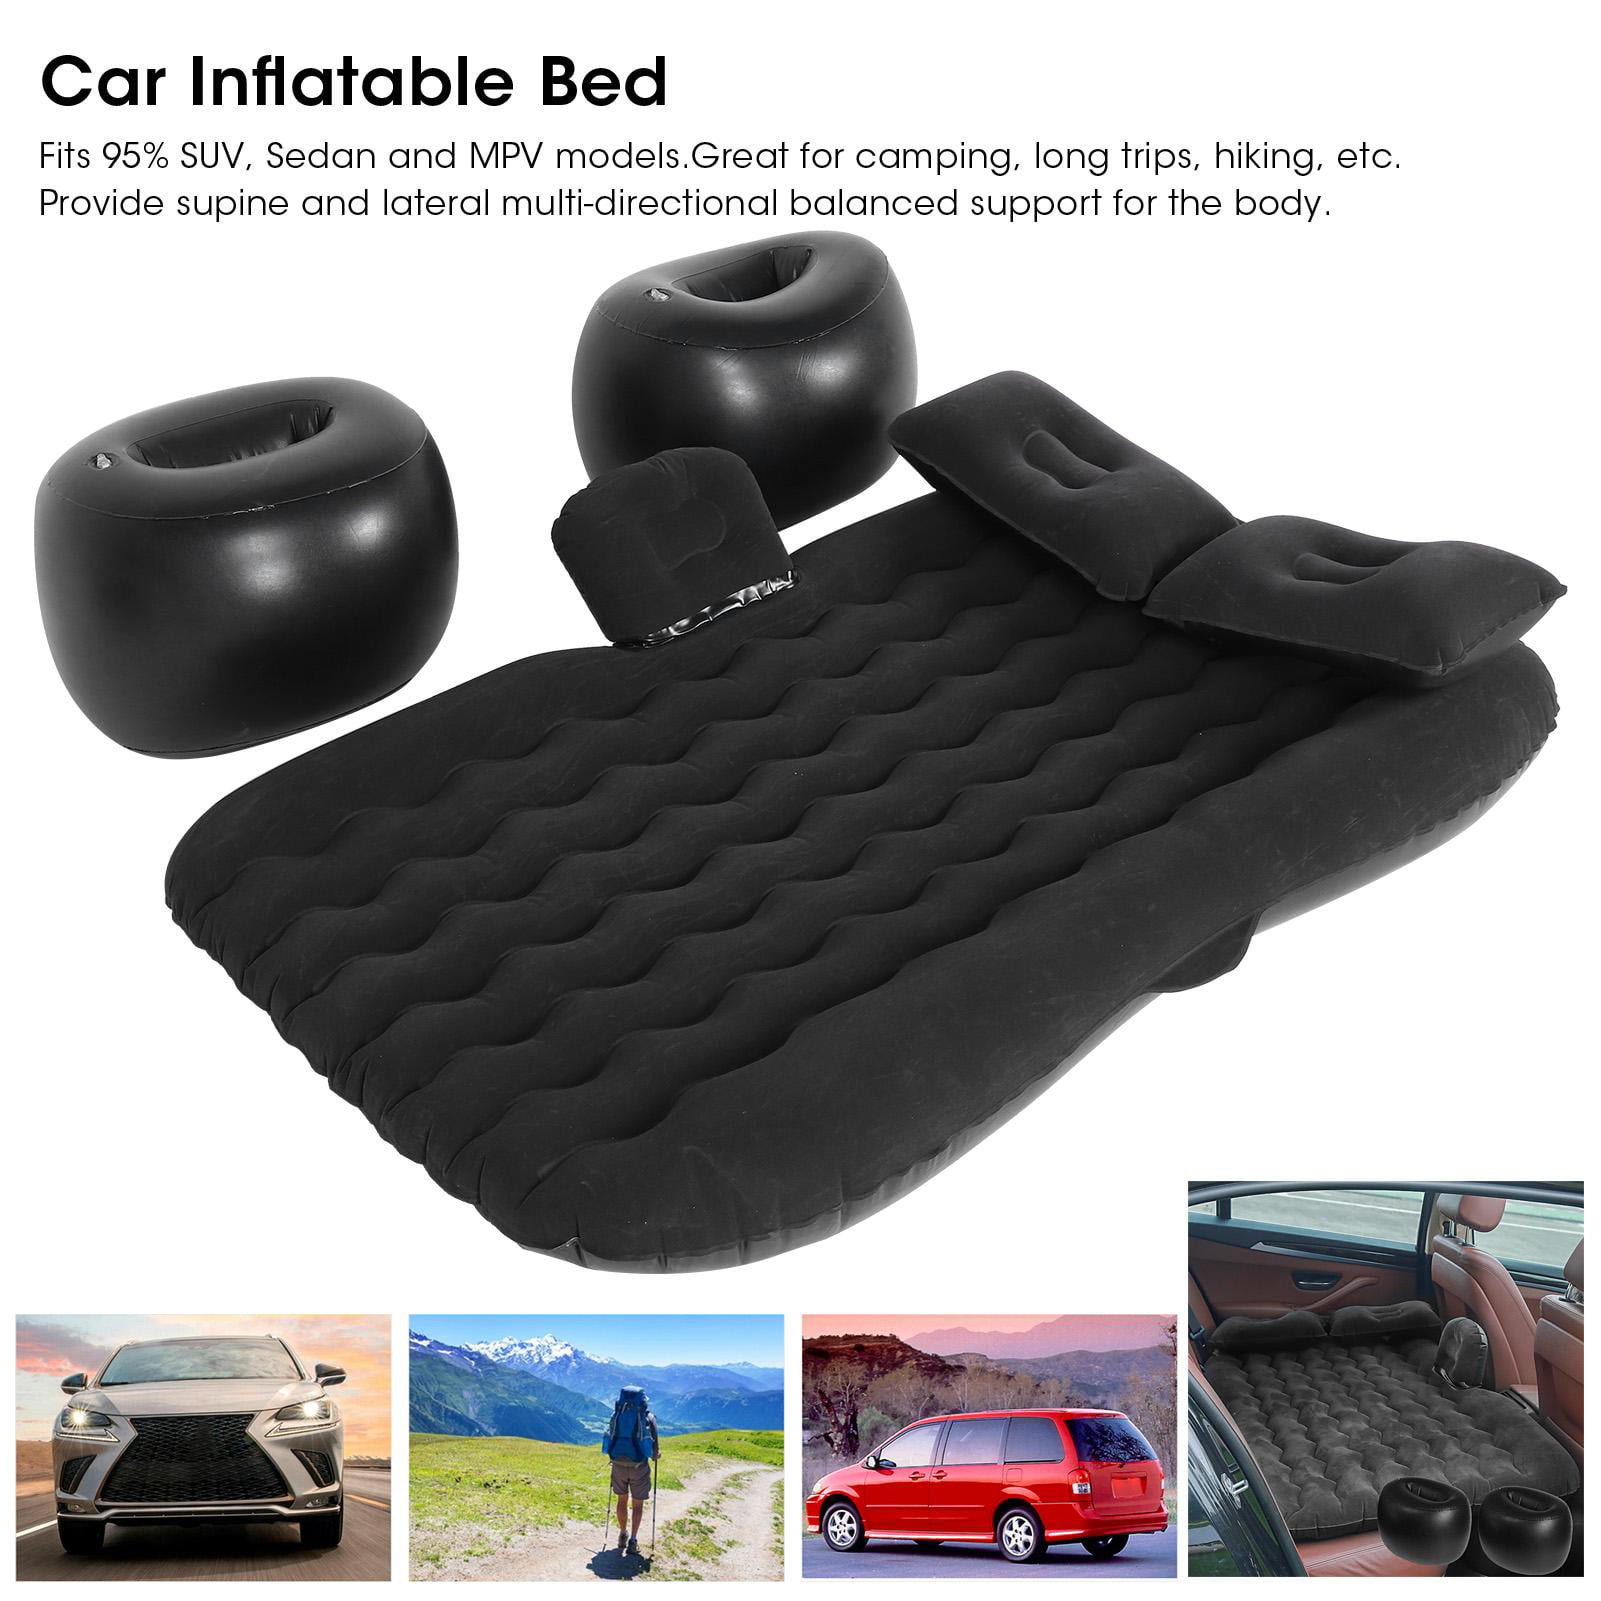 Estink Car Inflatable Bed Portable Travel Camping Inflatable Air Mattress PVC& Flocking Car Sleeping Bed with Inflatable Pillows for Back Seat Truck SUV Minivan Travel 